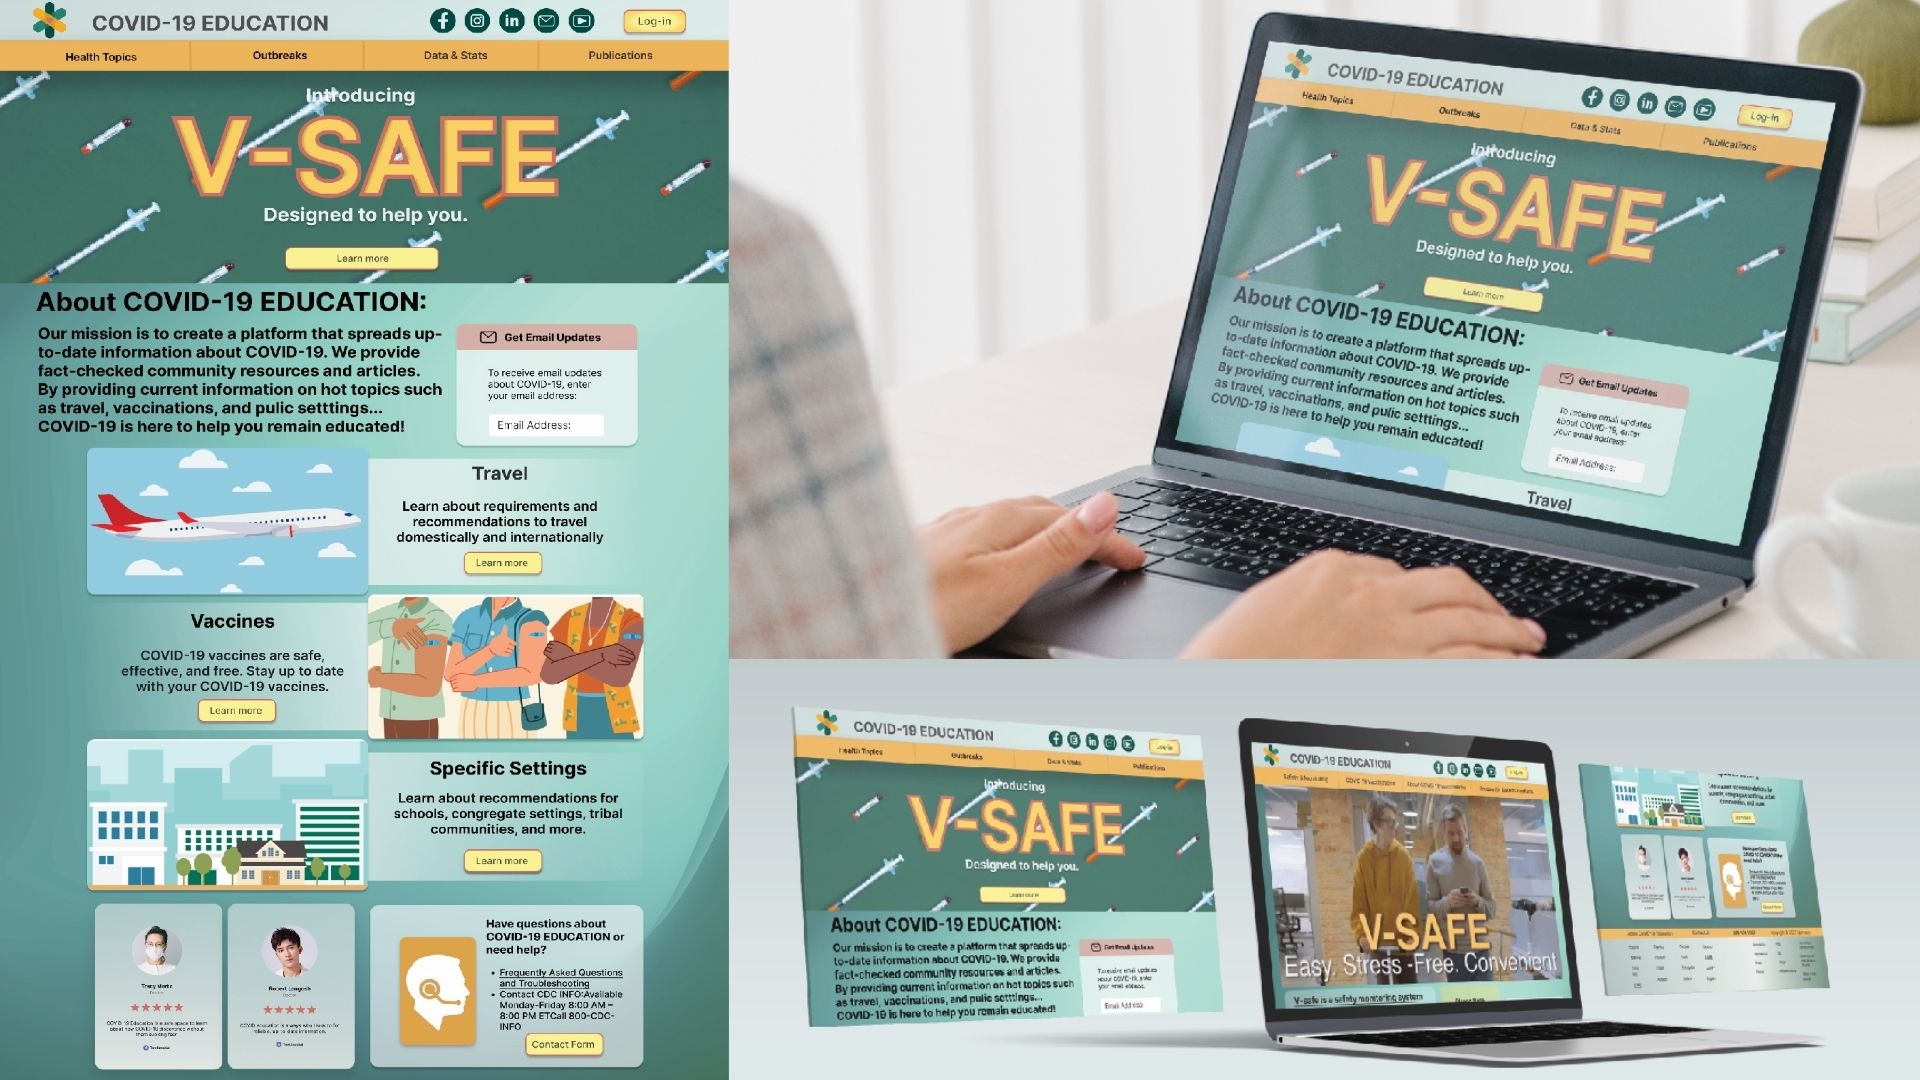 "Website Design, V-Safe" / "Website Design, V-Safe," website design, 1080x1920 px, 2022. This website is trendy, modern website for COVID-19 education.